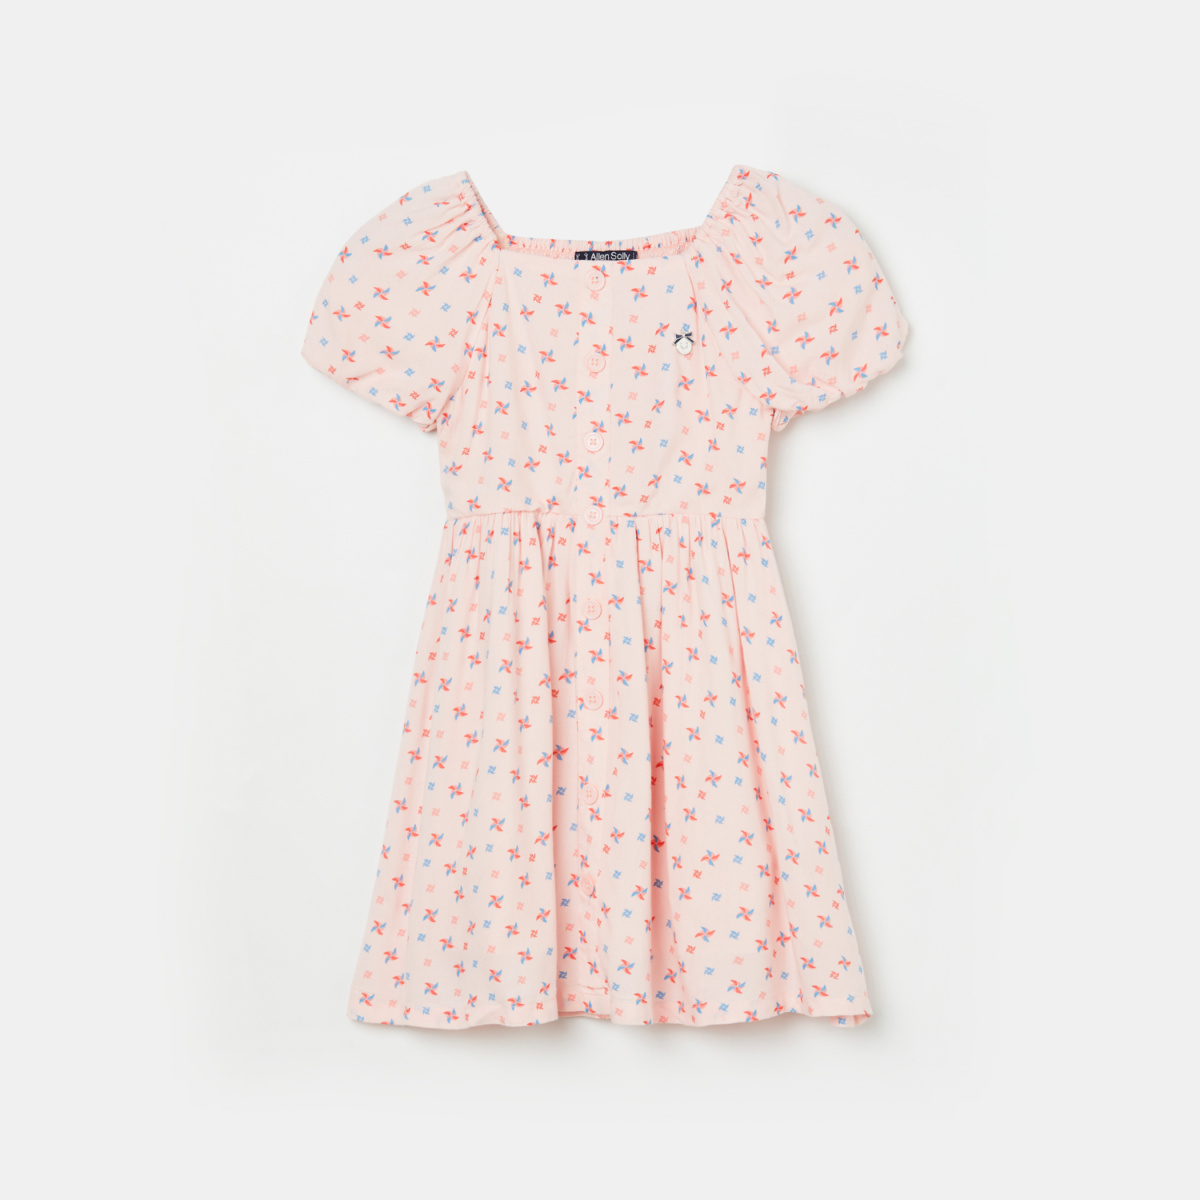 ALLEN SOLLY Girls Printed Puffed Sleeves A-Line Dress